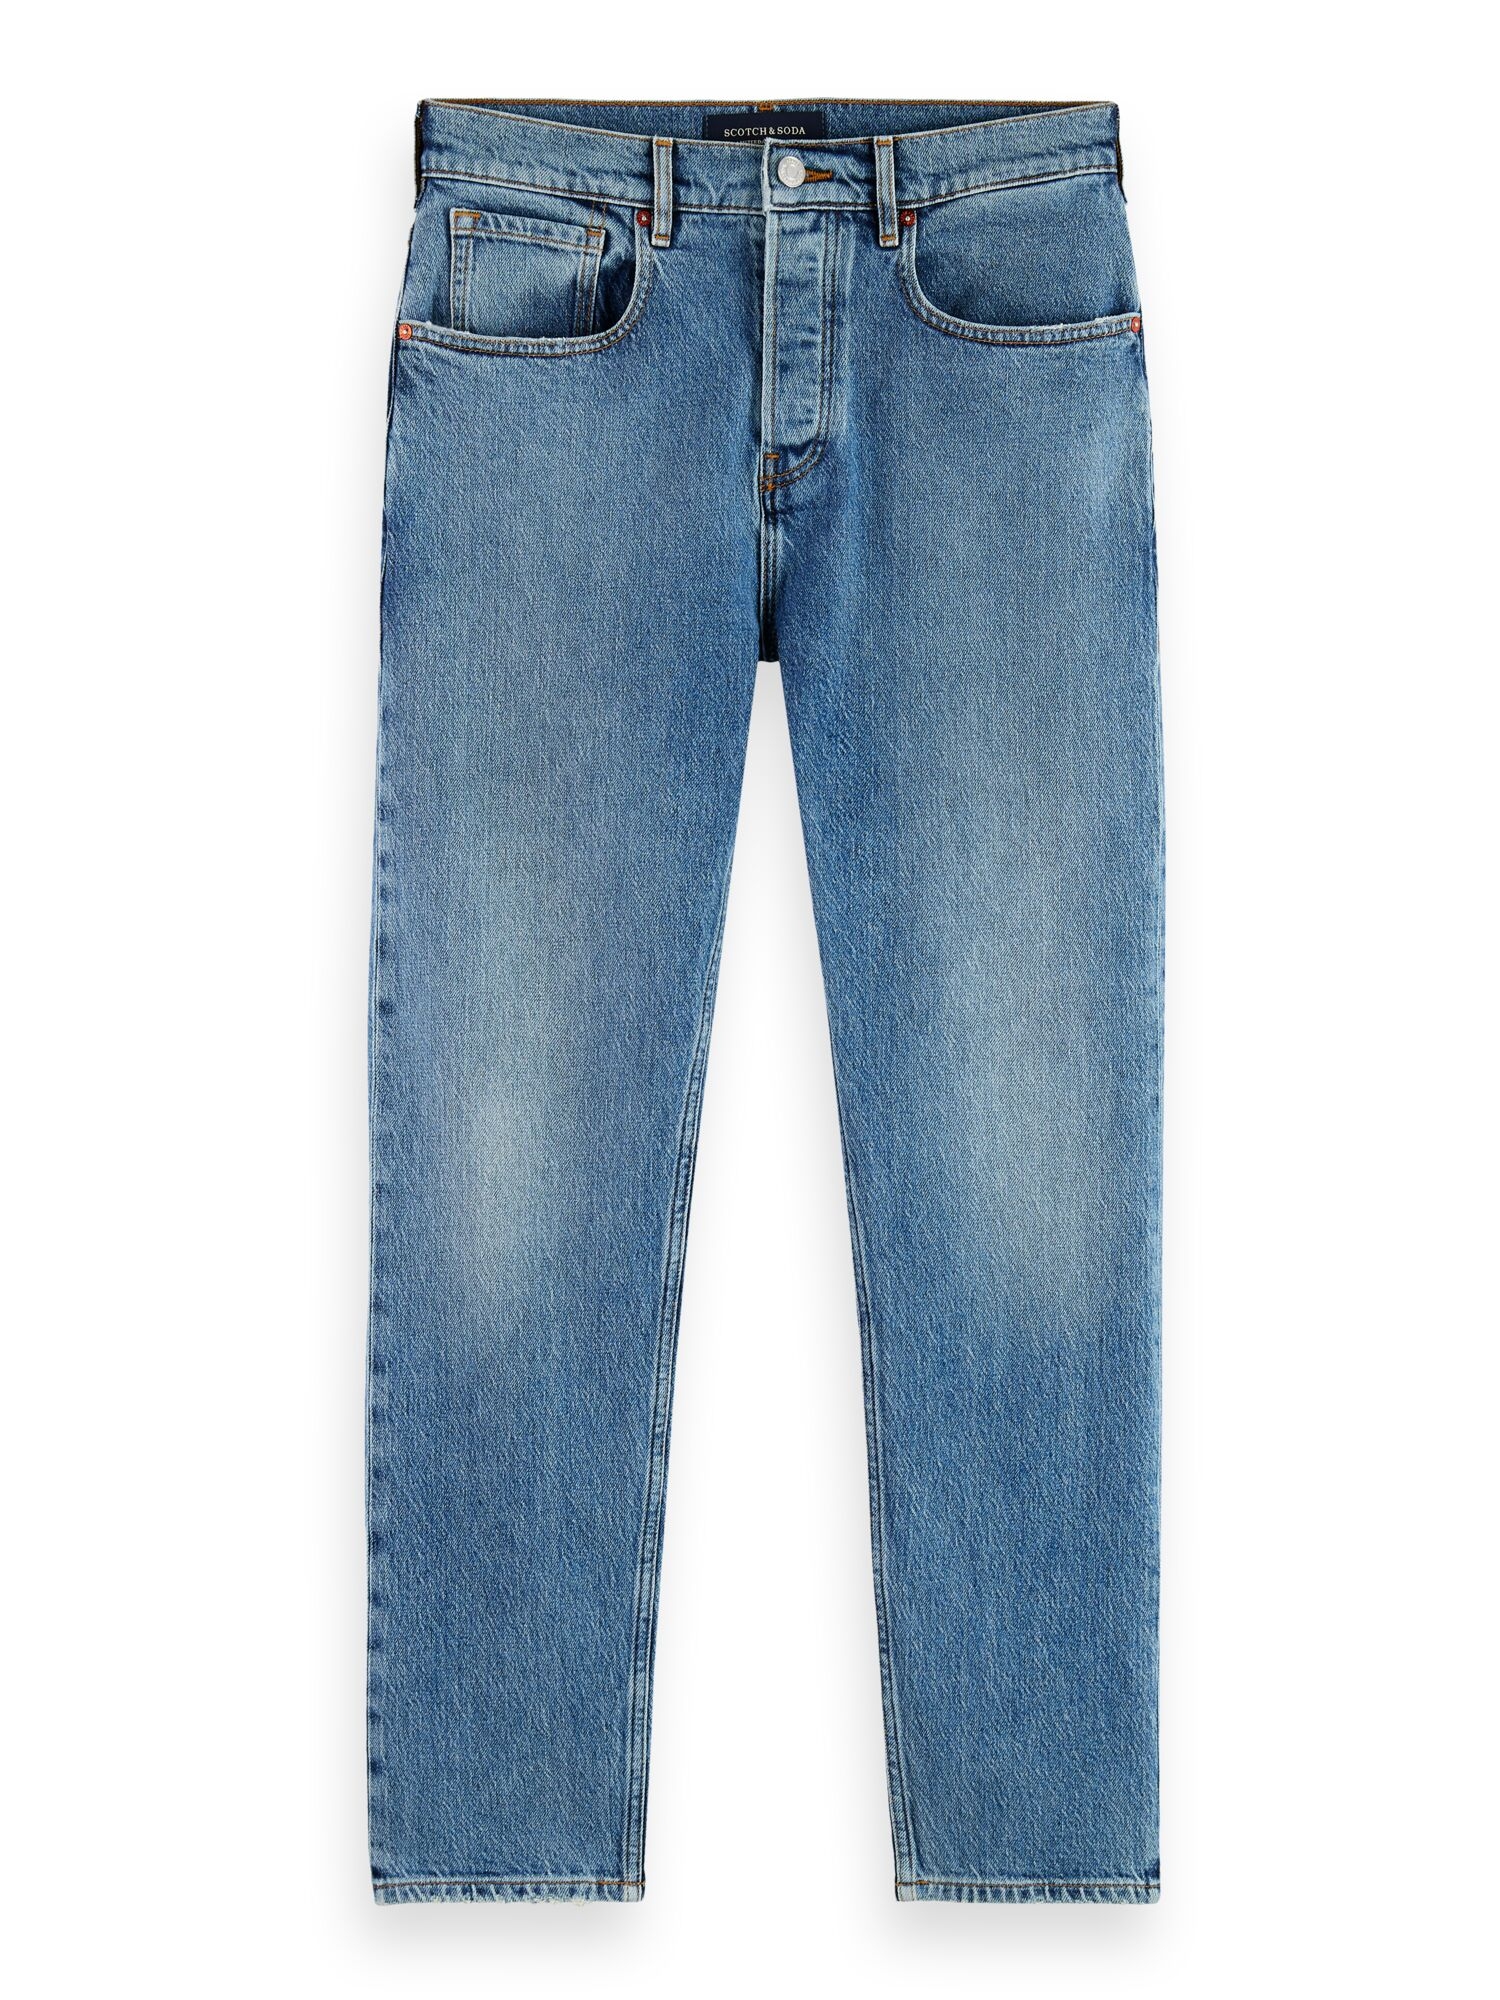 Scotch & Soda | Norm straight leg jeans in recycled cotton —Forecast is blue